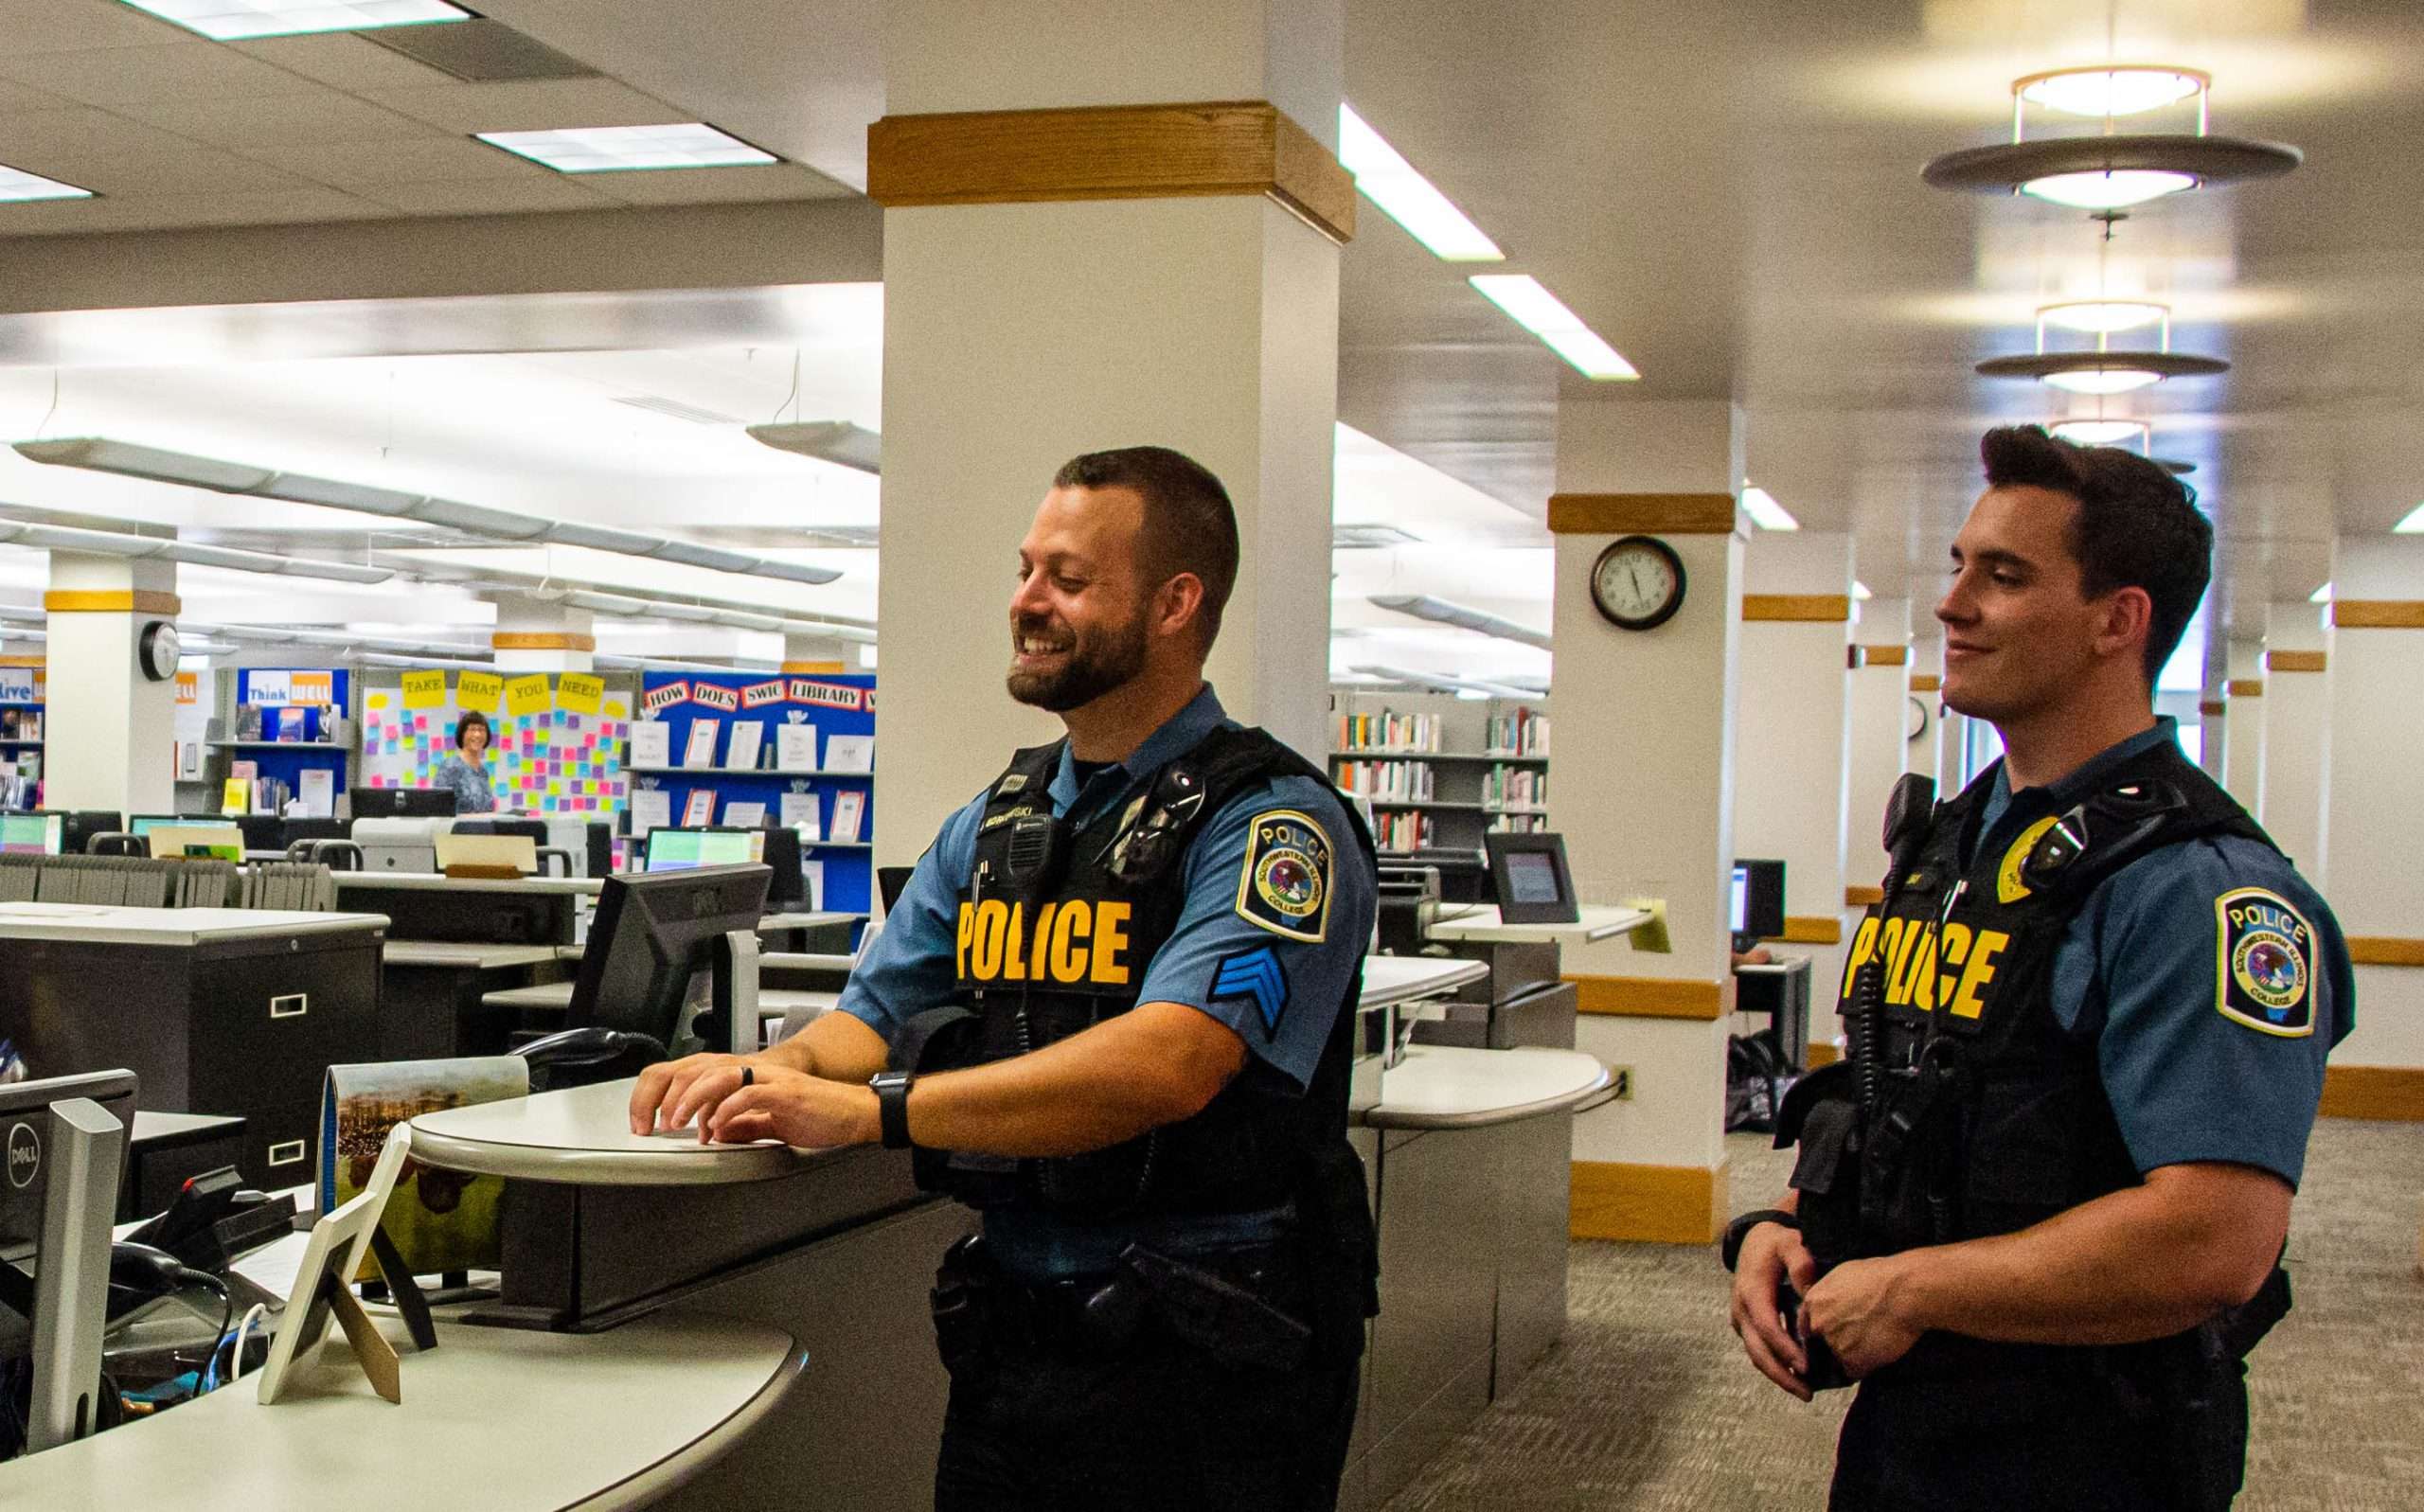 Public Safety visiting Belleville Campus Library